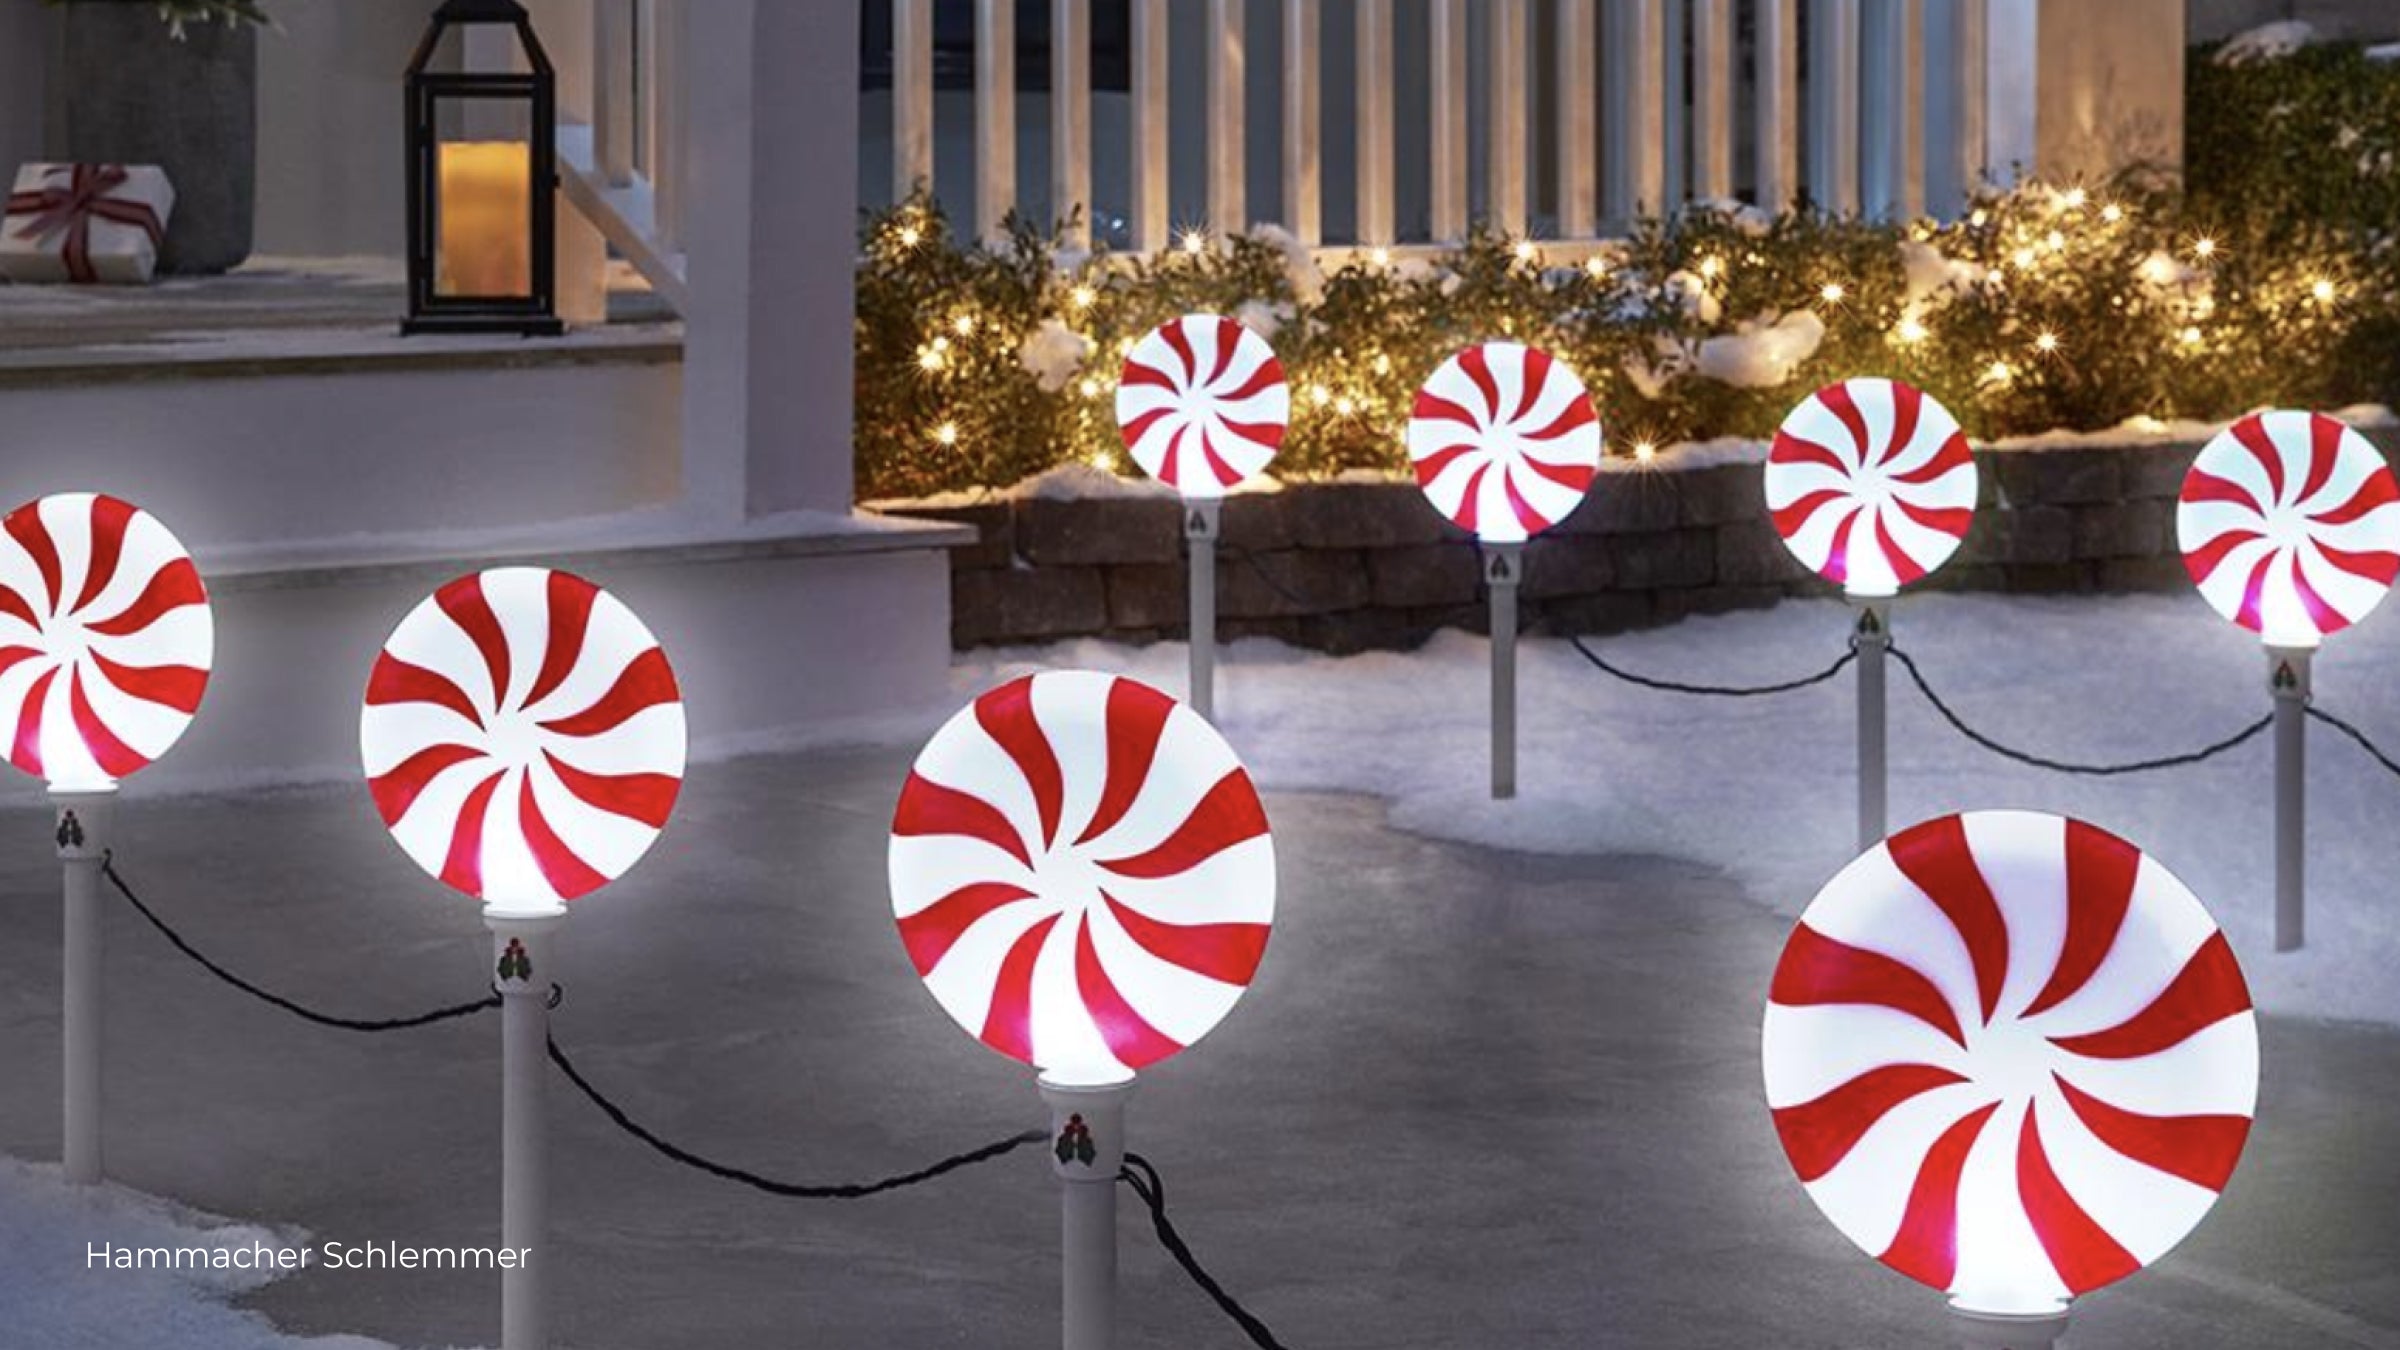 Peppermint candy holiday pathway lights from Hammacher Schlemmer